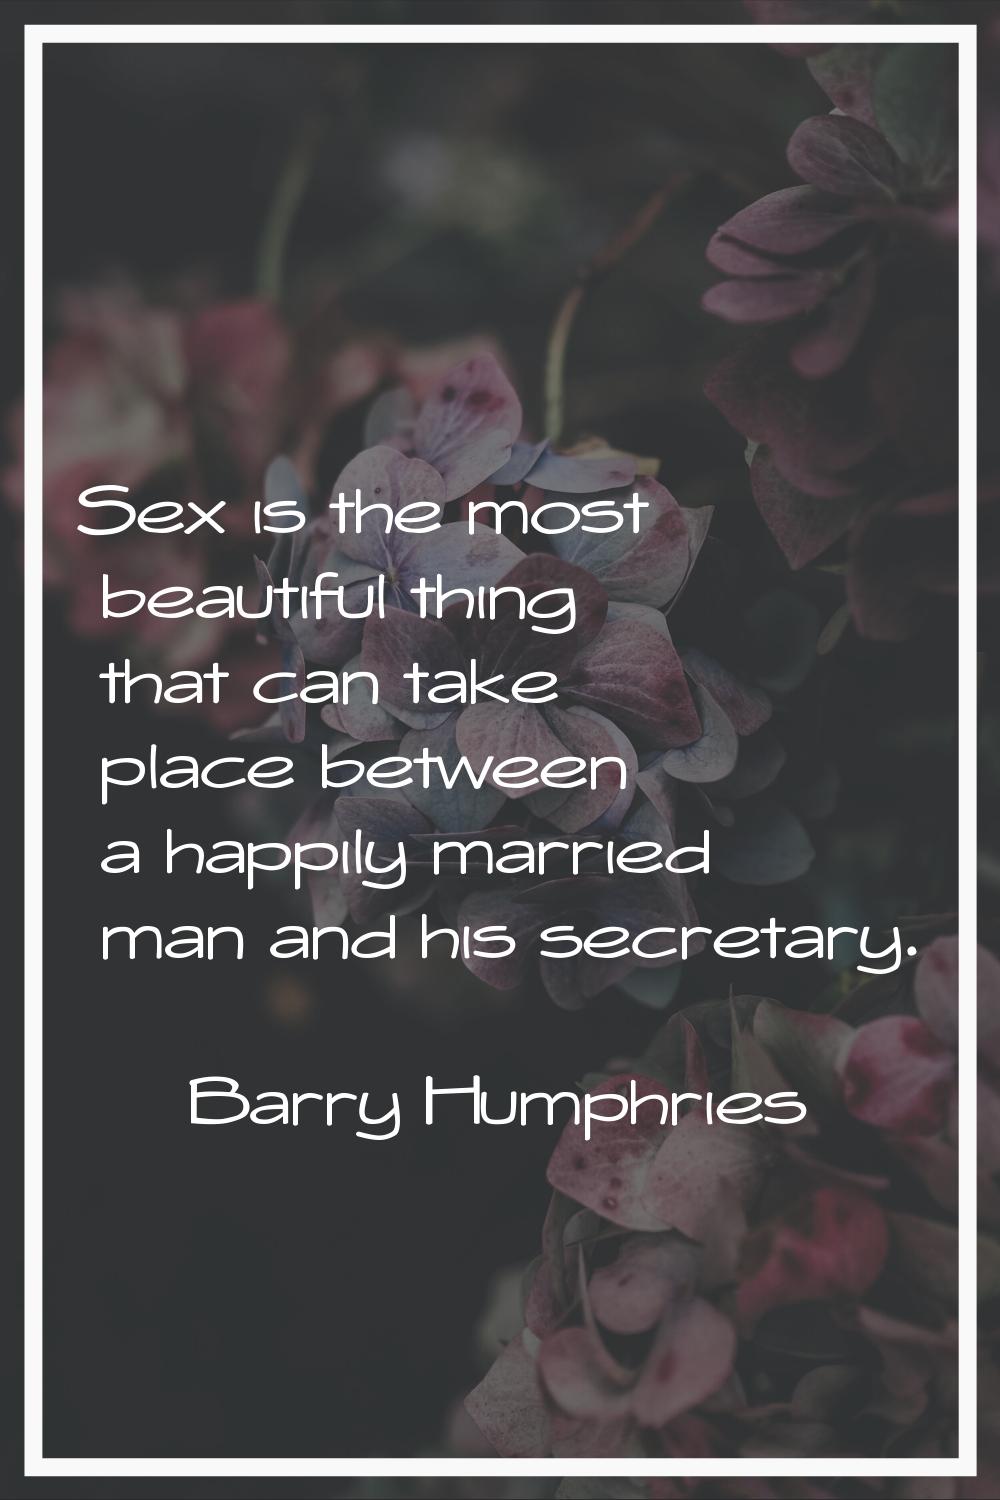 Sex is the most beautiful thing that can take place between a happily married man and his secretary